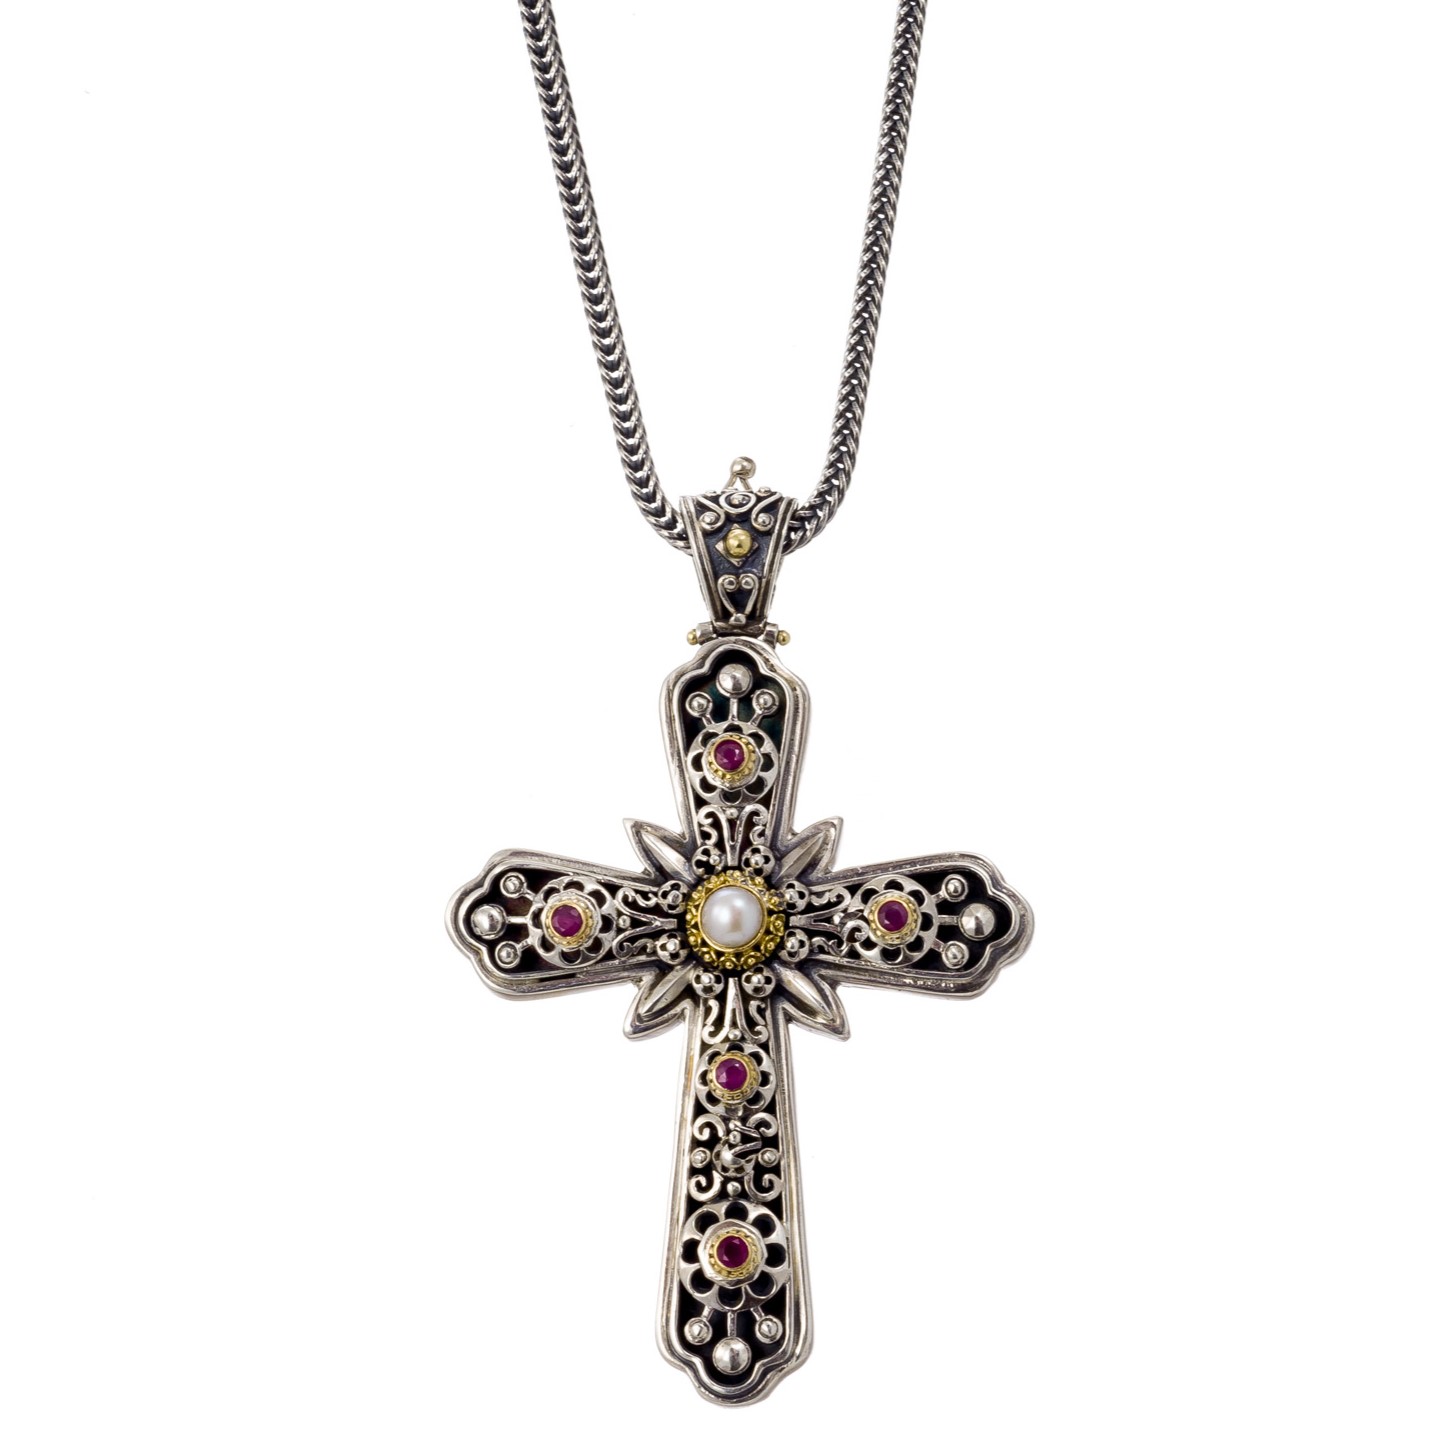 Byzantine cross in 18K Gold and Sterling silver with Gemstones